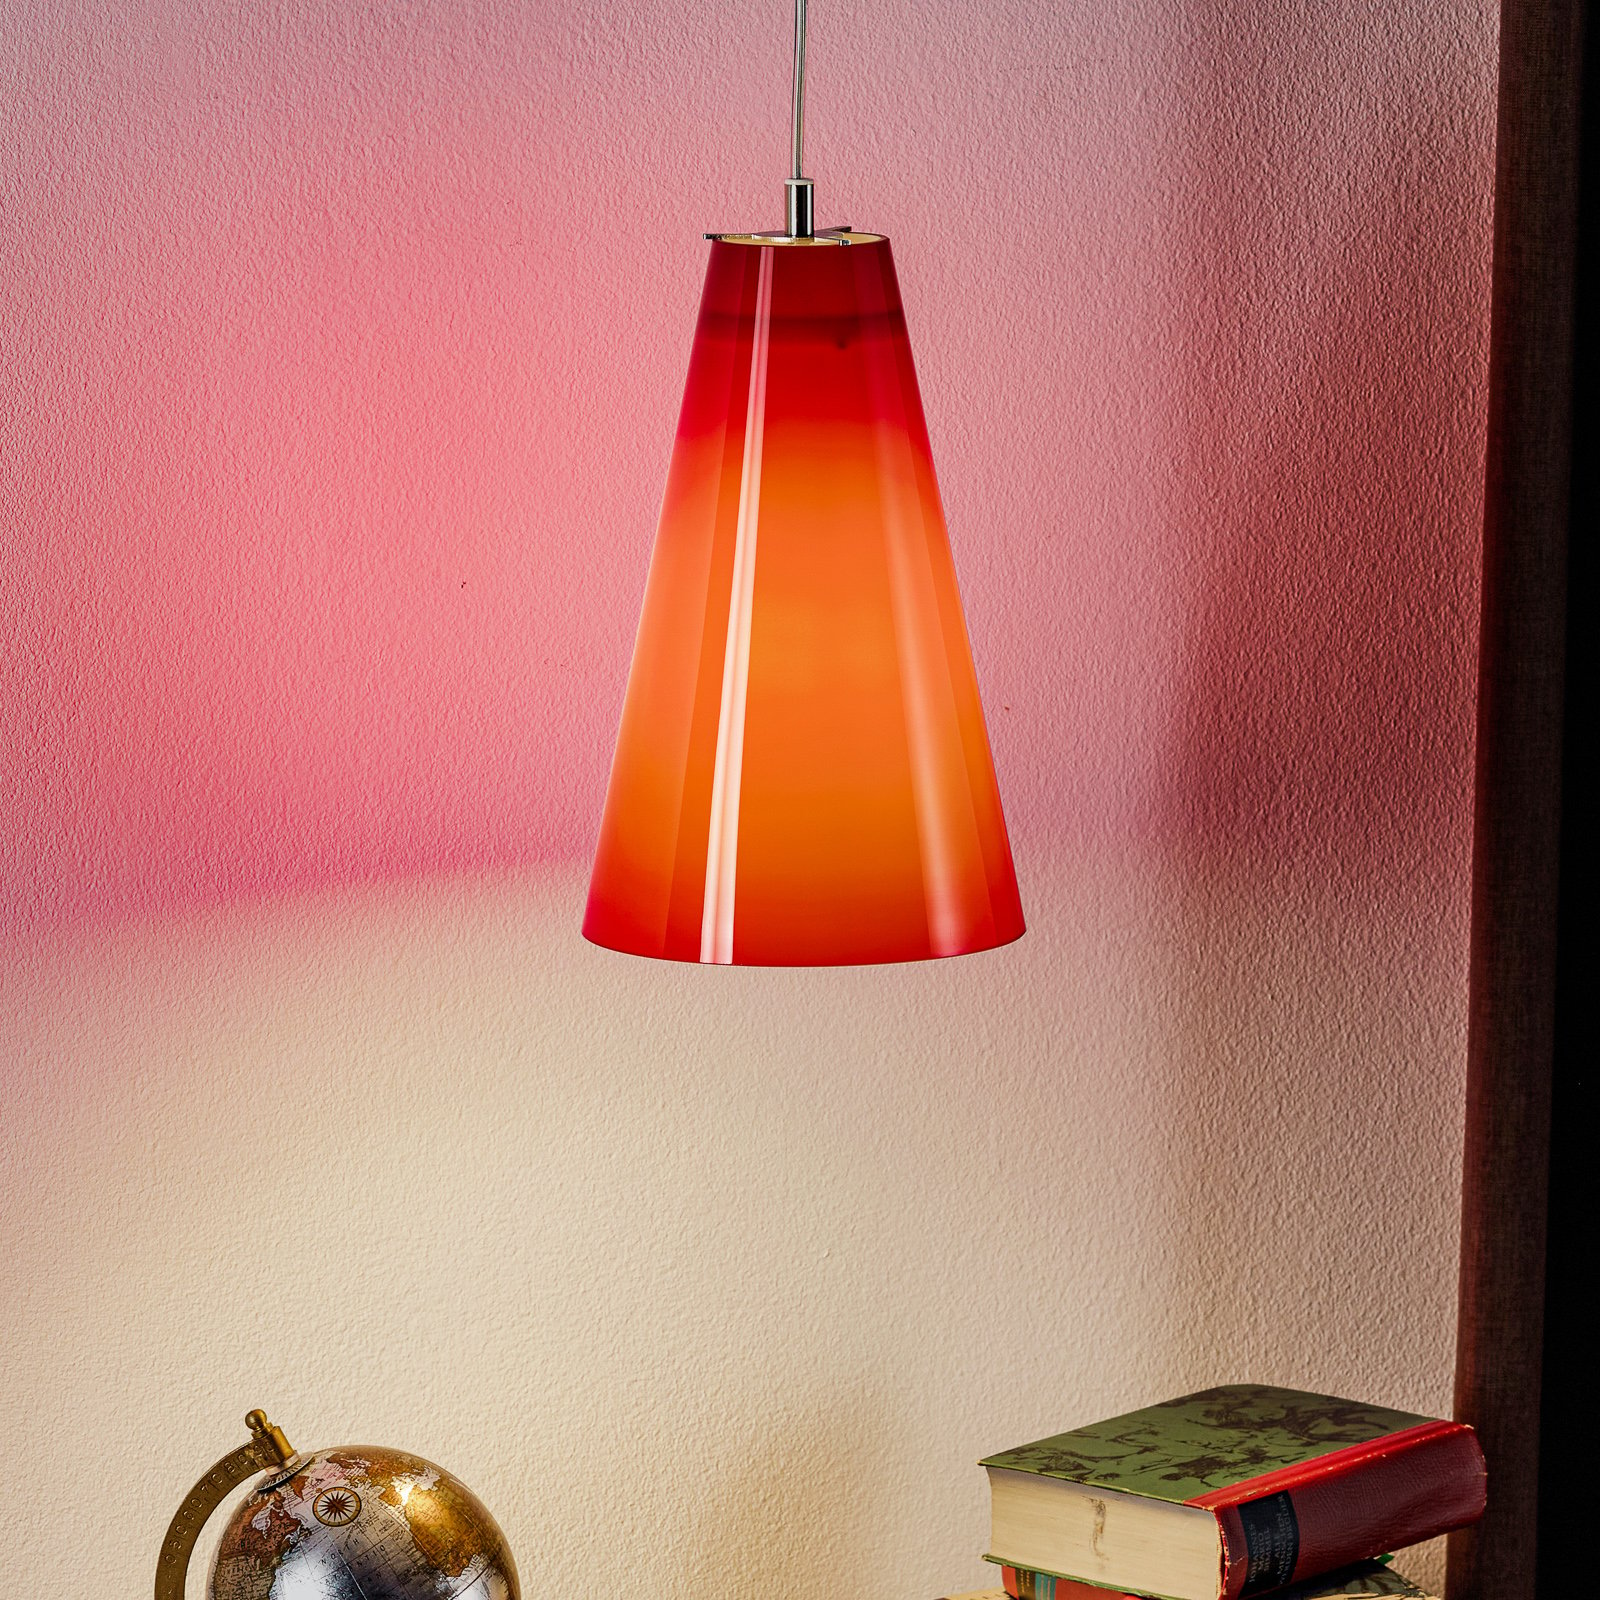 Hanging light by Schnepel, red